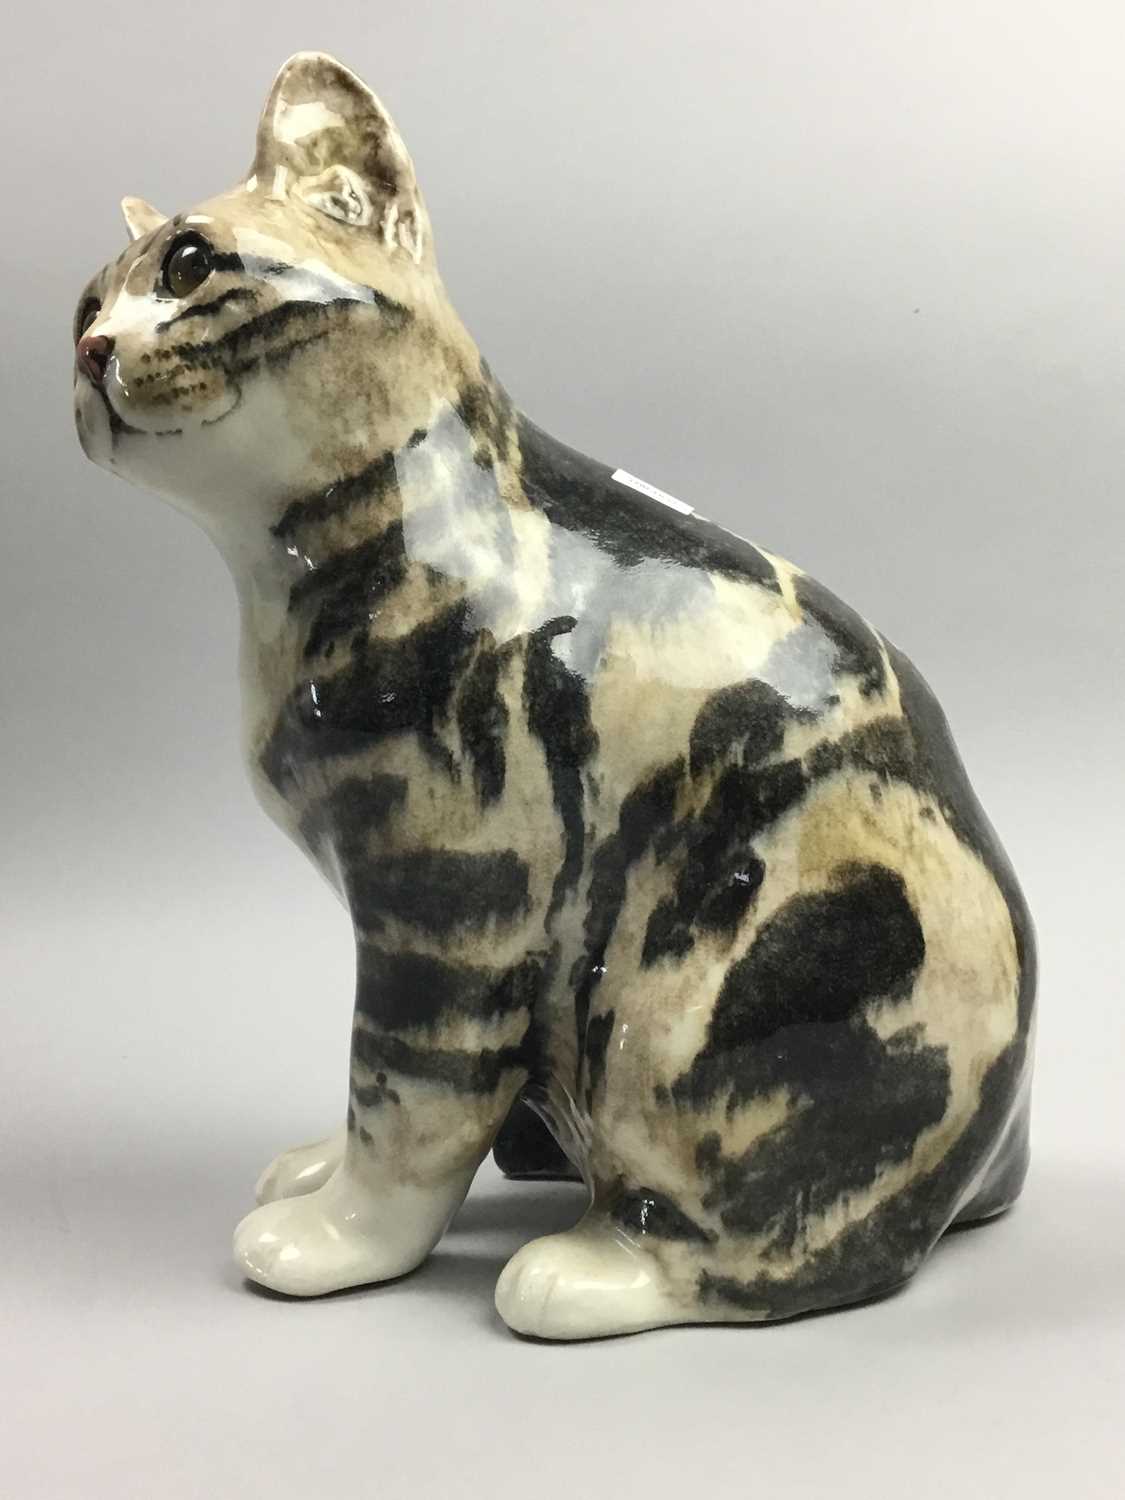 Lot 403 - A BESWICK FIGURE OF A CAT AND THREE OTHER CAT FIGURES